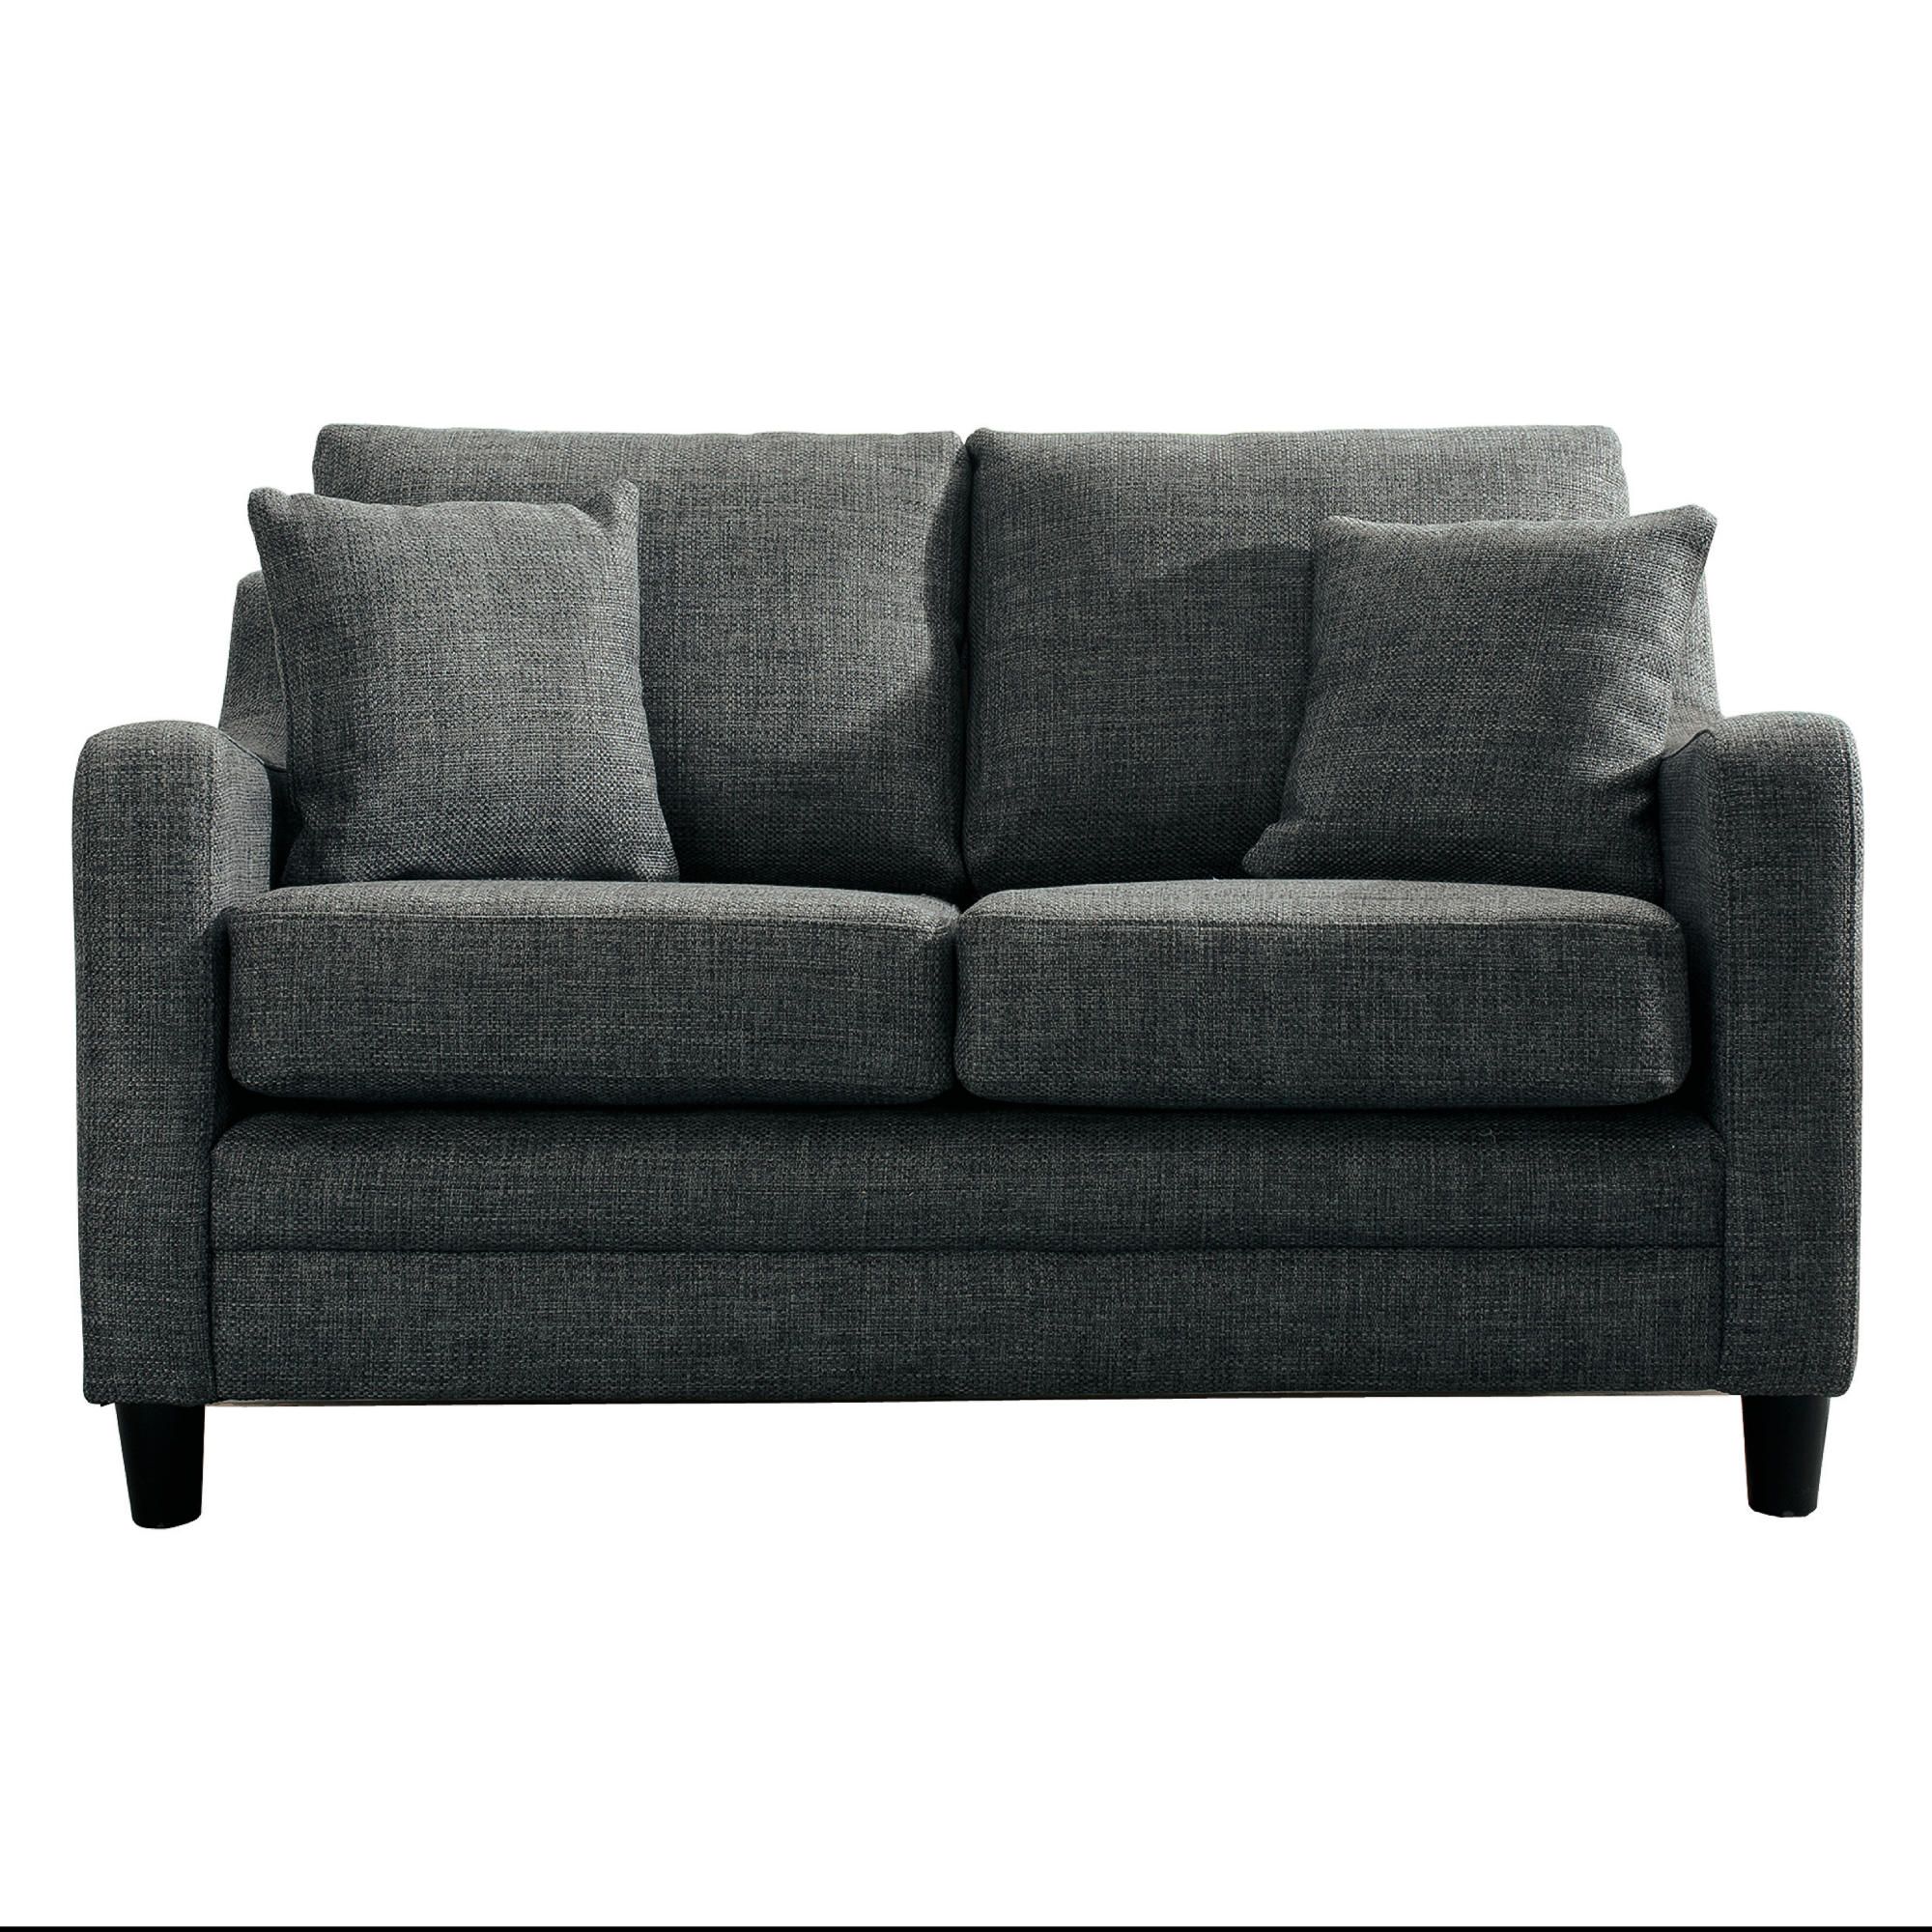 Buckingham Fabric Small Sofa in Charcoal at Tescos Direct